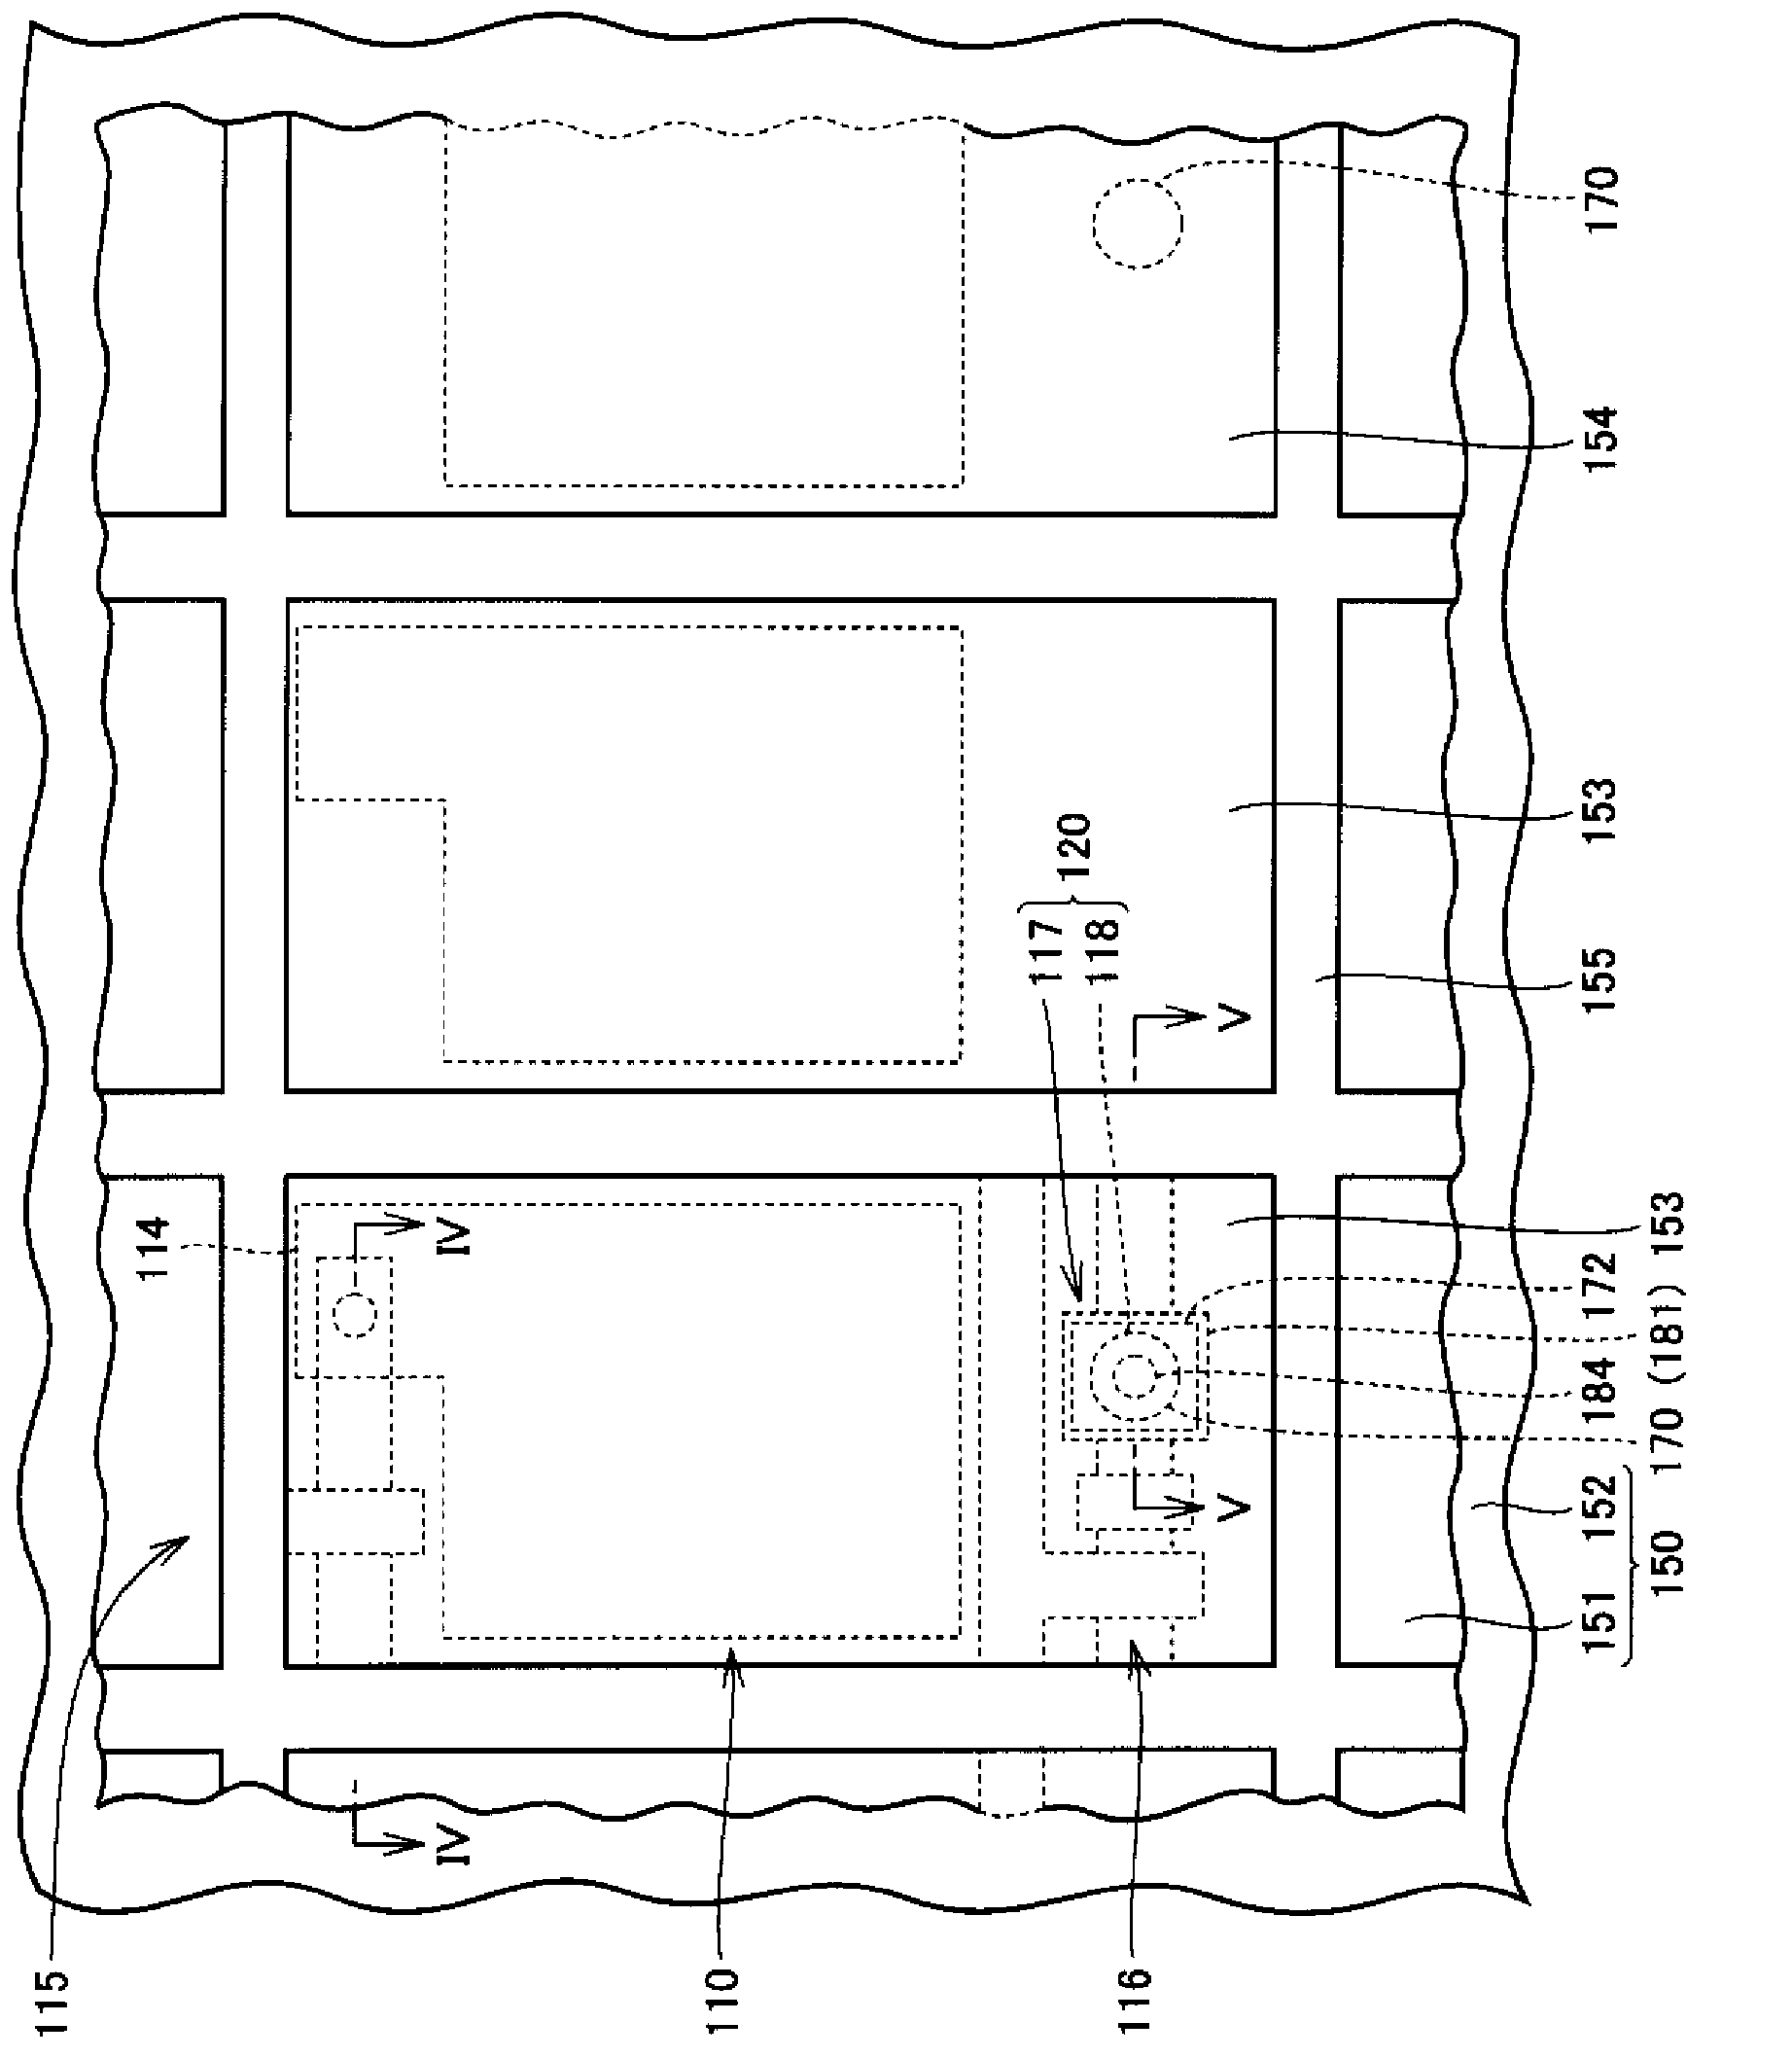 Display device with touch panel functionality